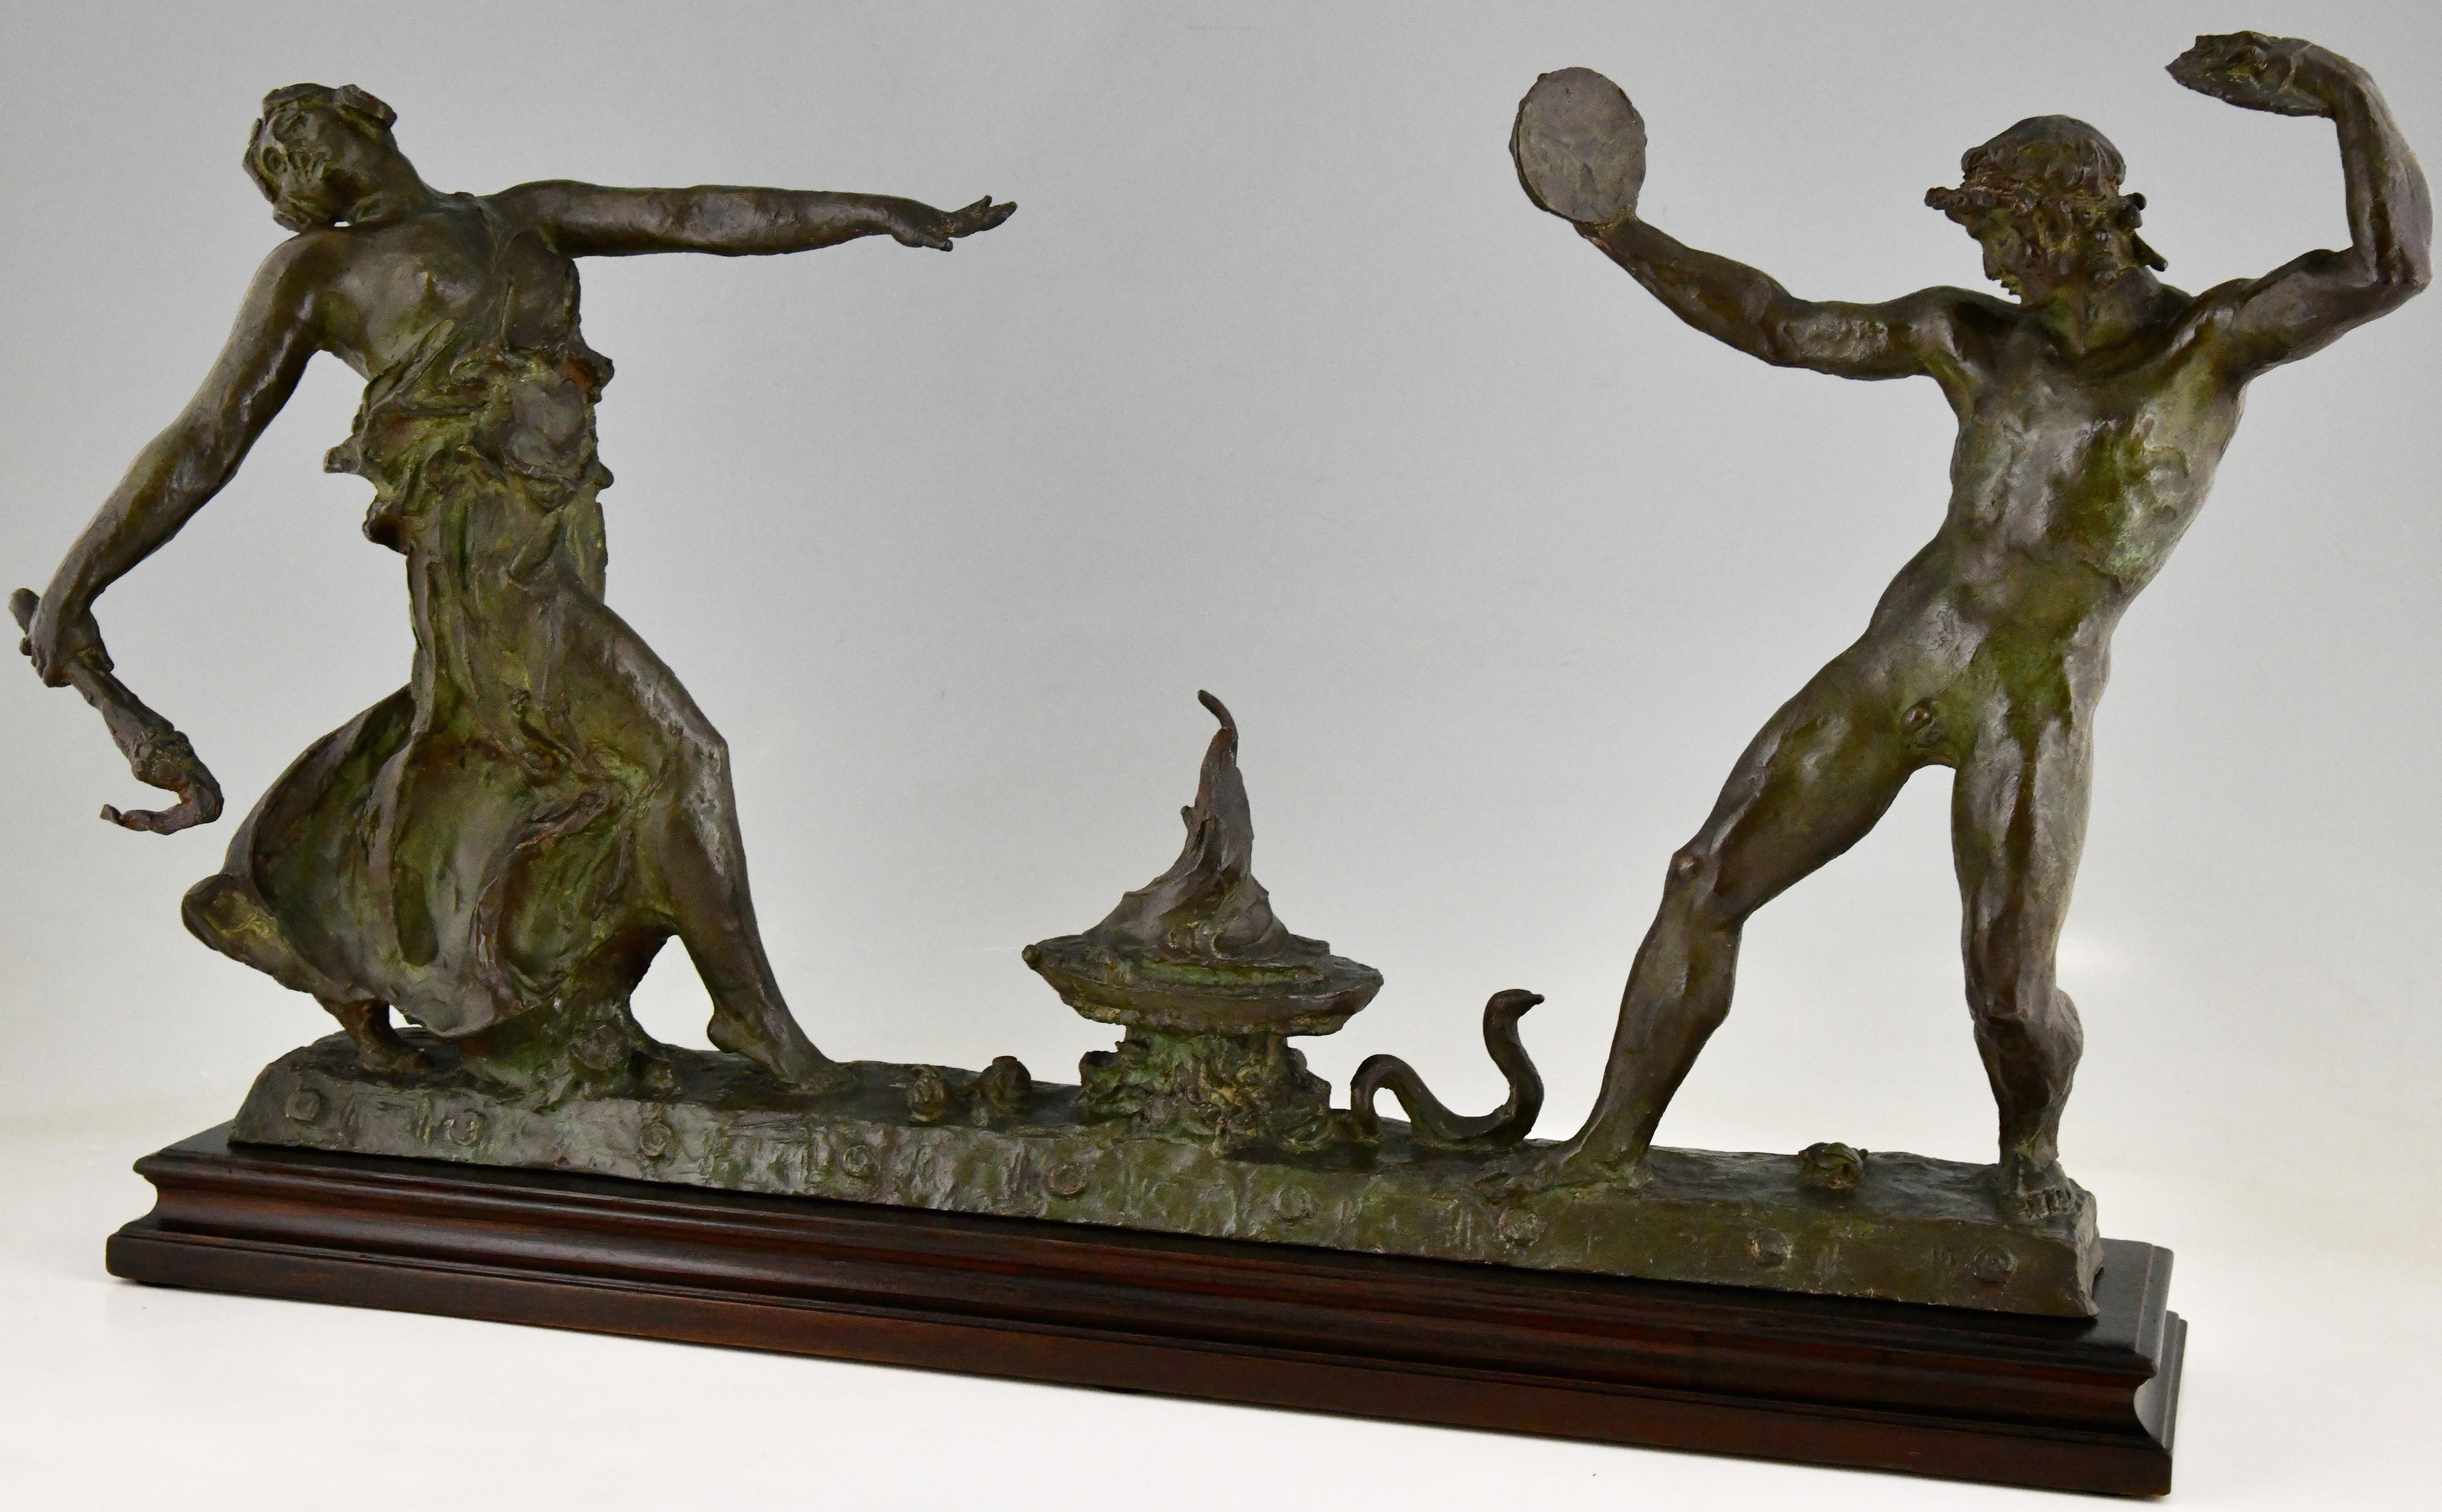 Art Deco bronze sculpture dance of fire, representing the dancers Anna Pavlova and Mikhail Mordkin, signed by Félix Benneteau-Degrois. 
With foundry mark Le Blanc Barbedienne, marked Cire perdue, lost wax technique. 
Bronze, with beautiful patina